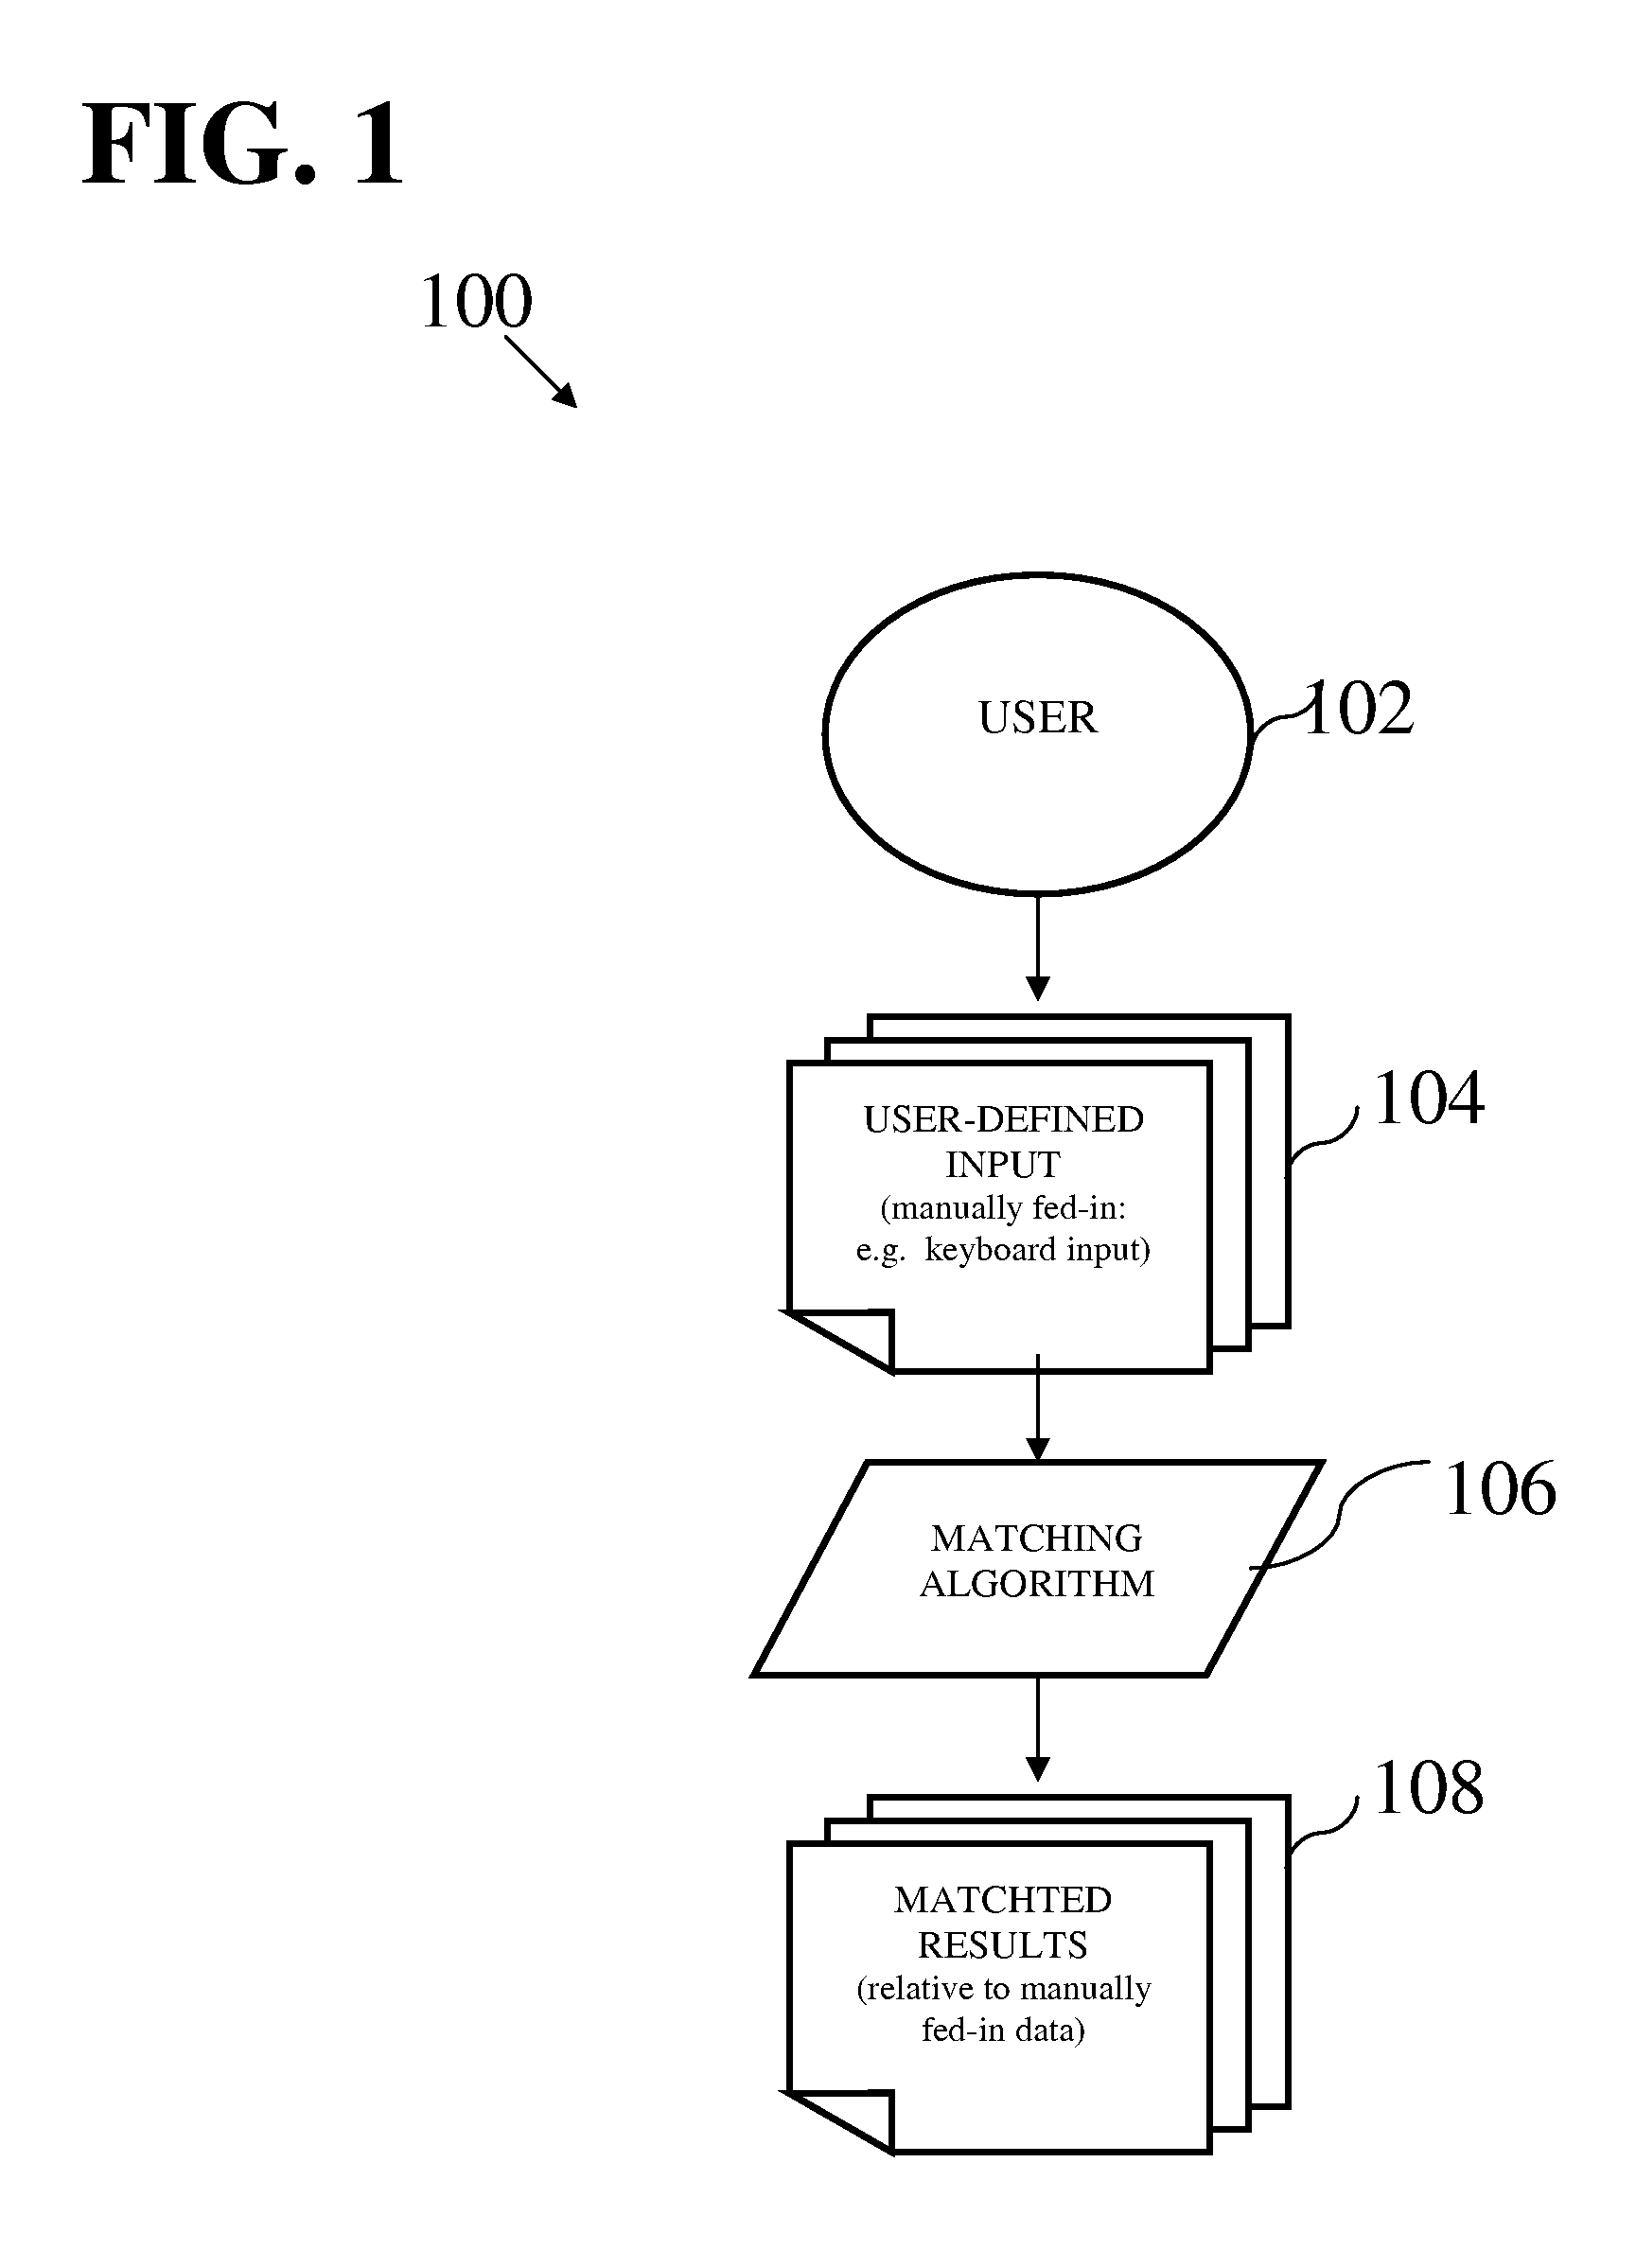 Method and system for matching user-generated text content